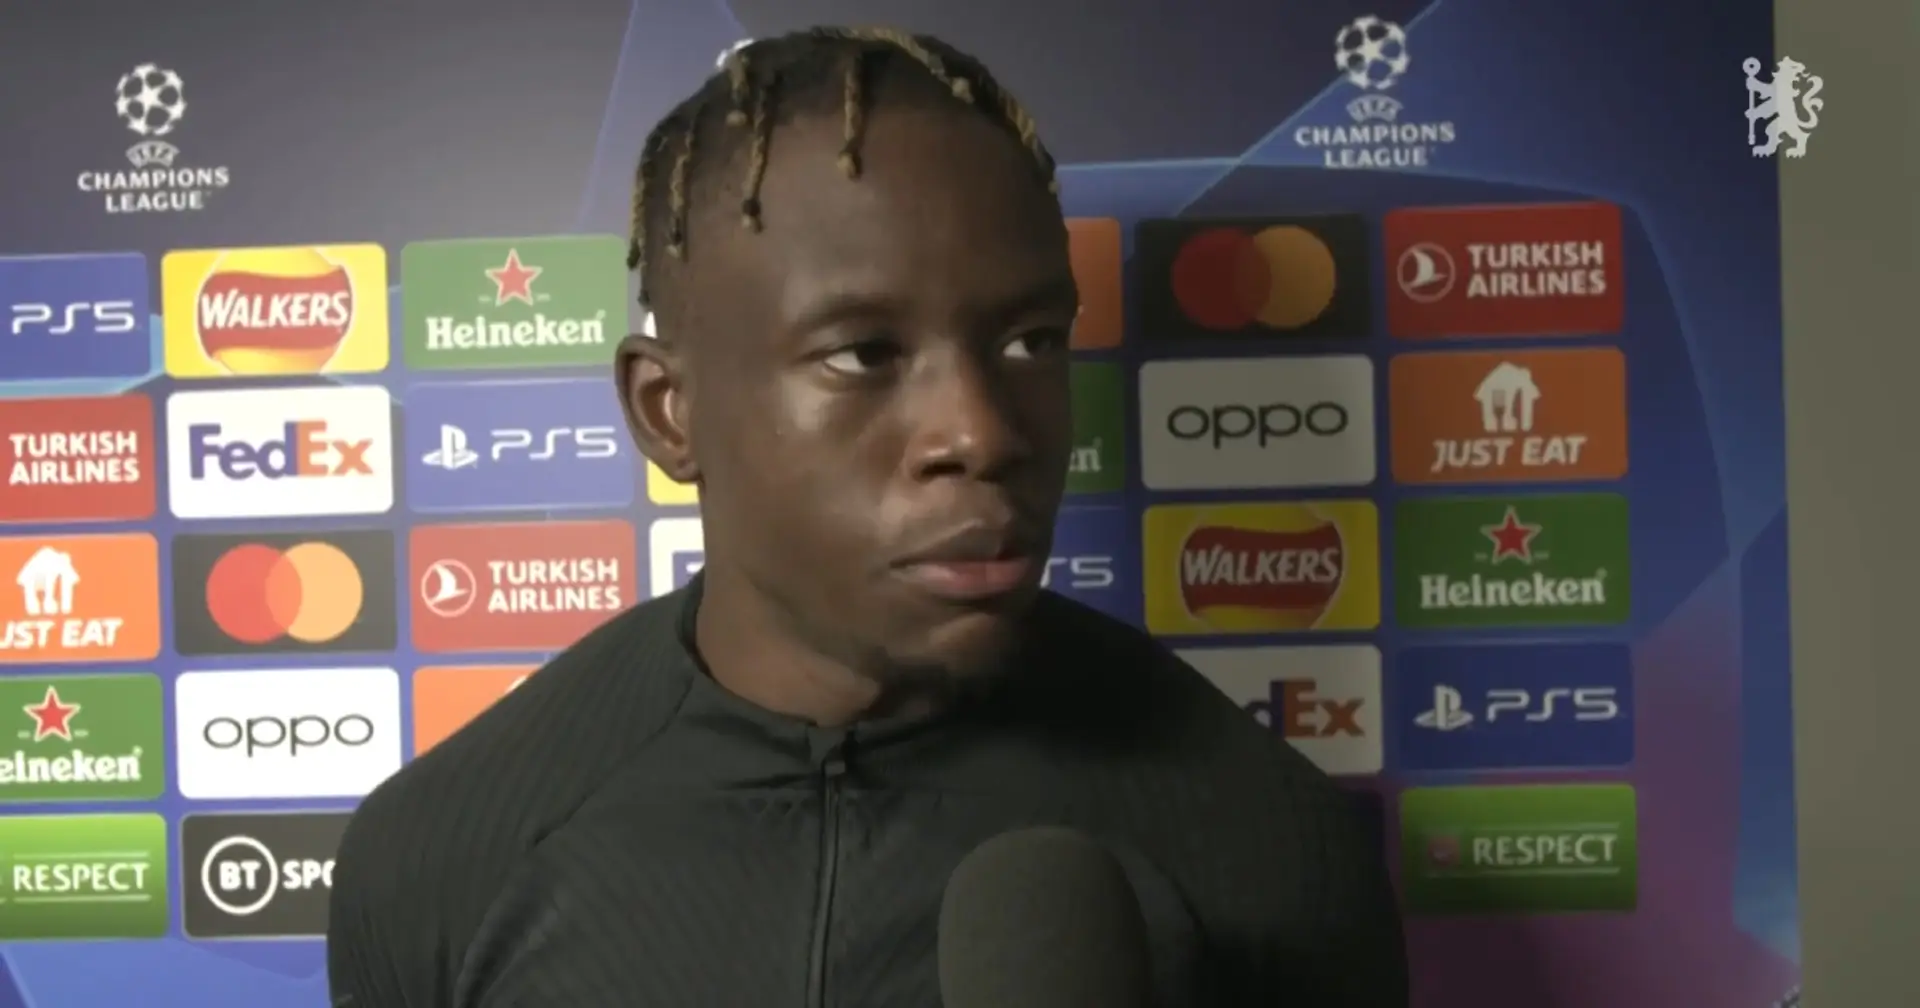 'I left Juventus to play': Denis Zakaria hints at frustrations over playing time after Chelsea debut